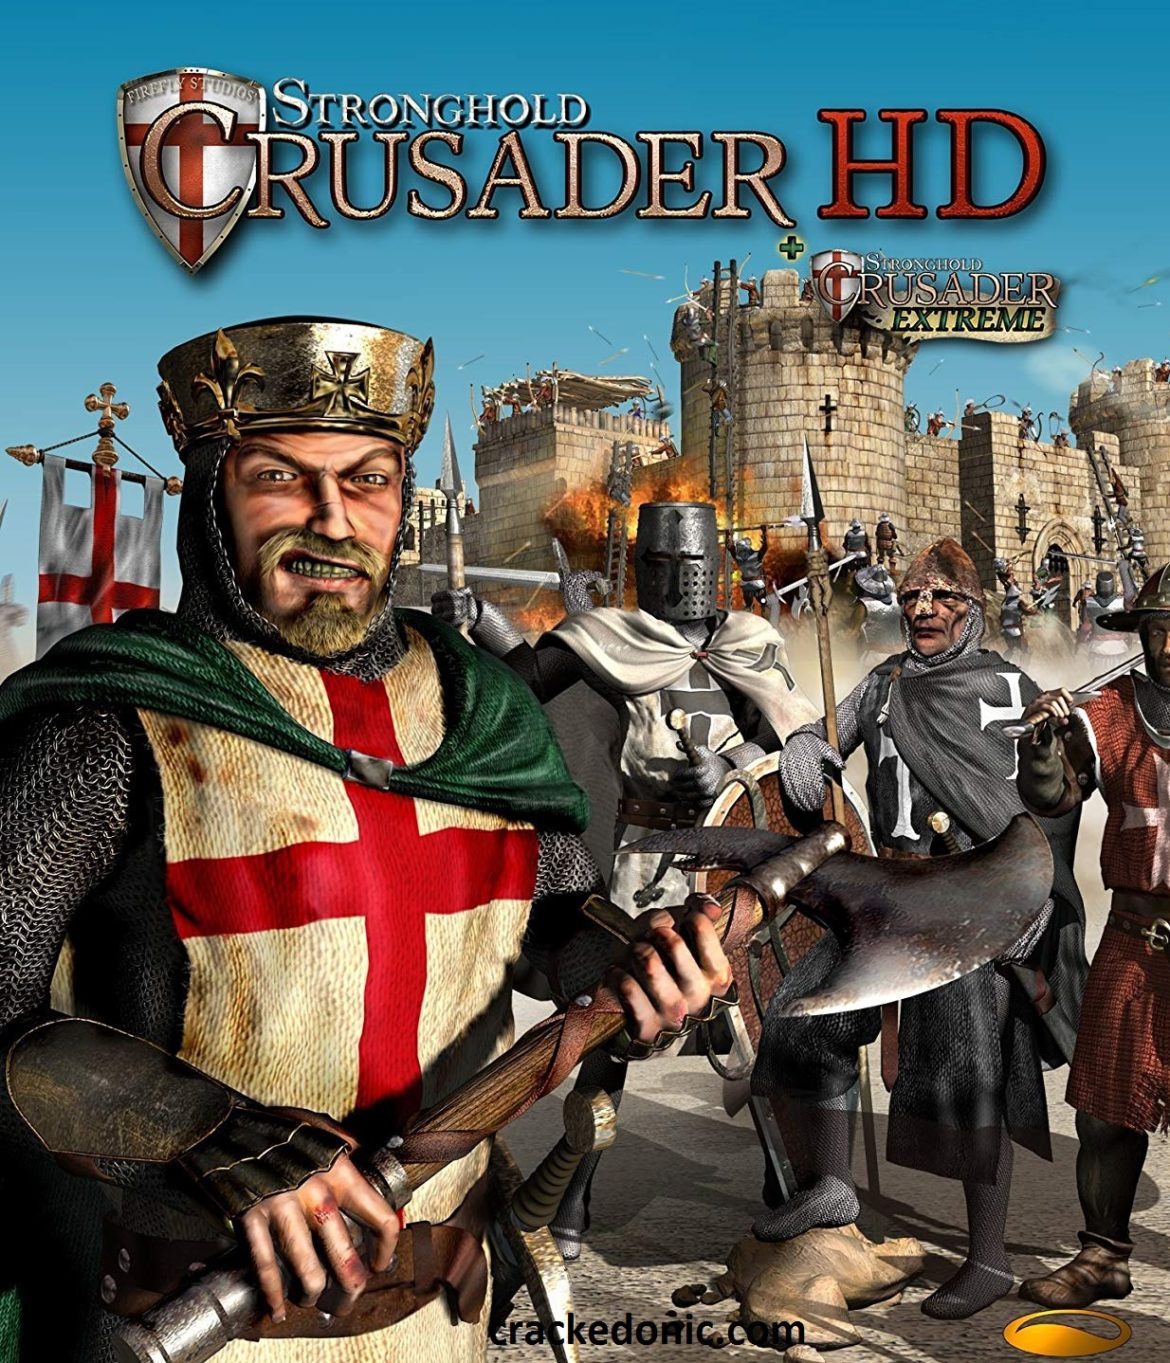 stronghold crusader 2 cheat engine download